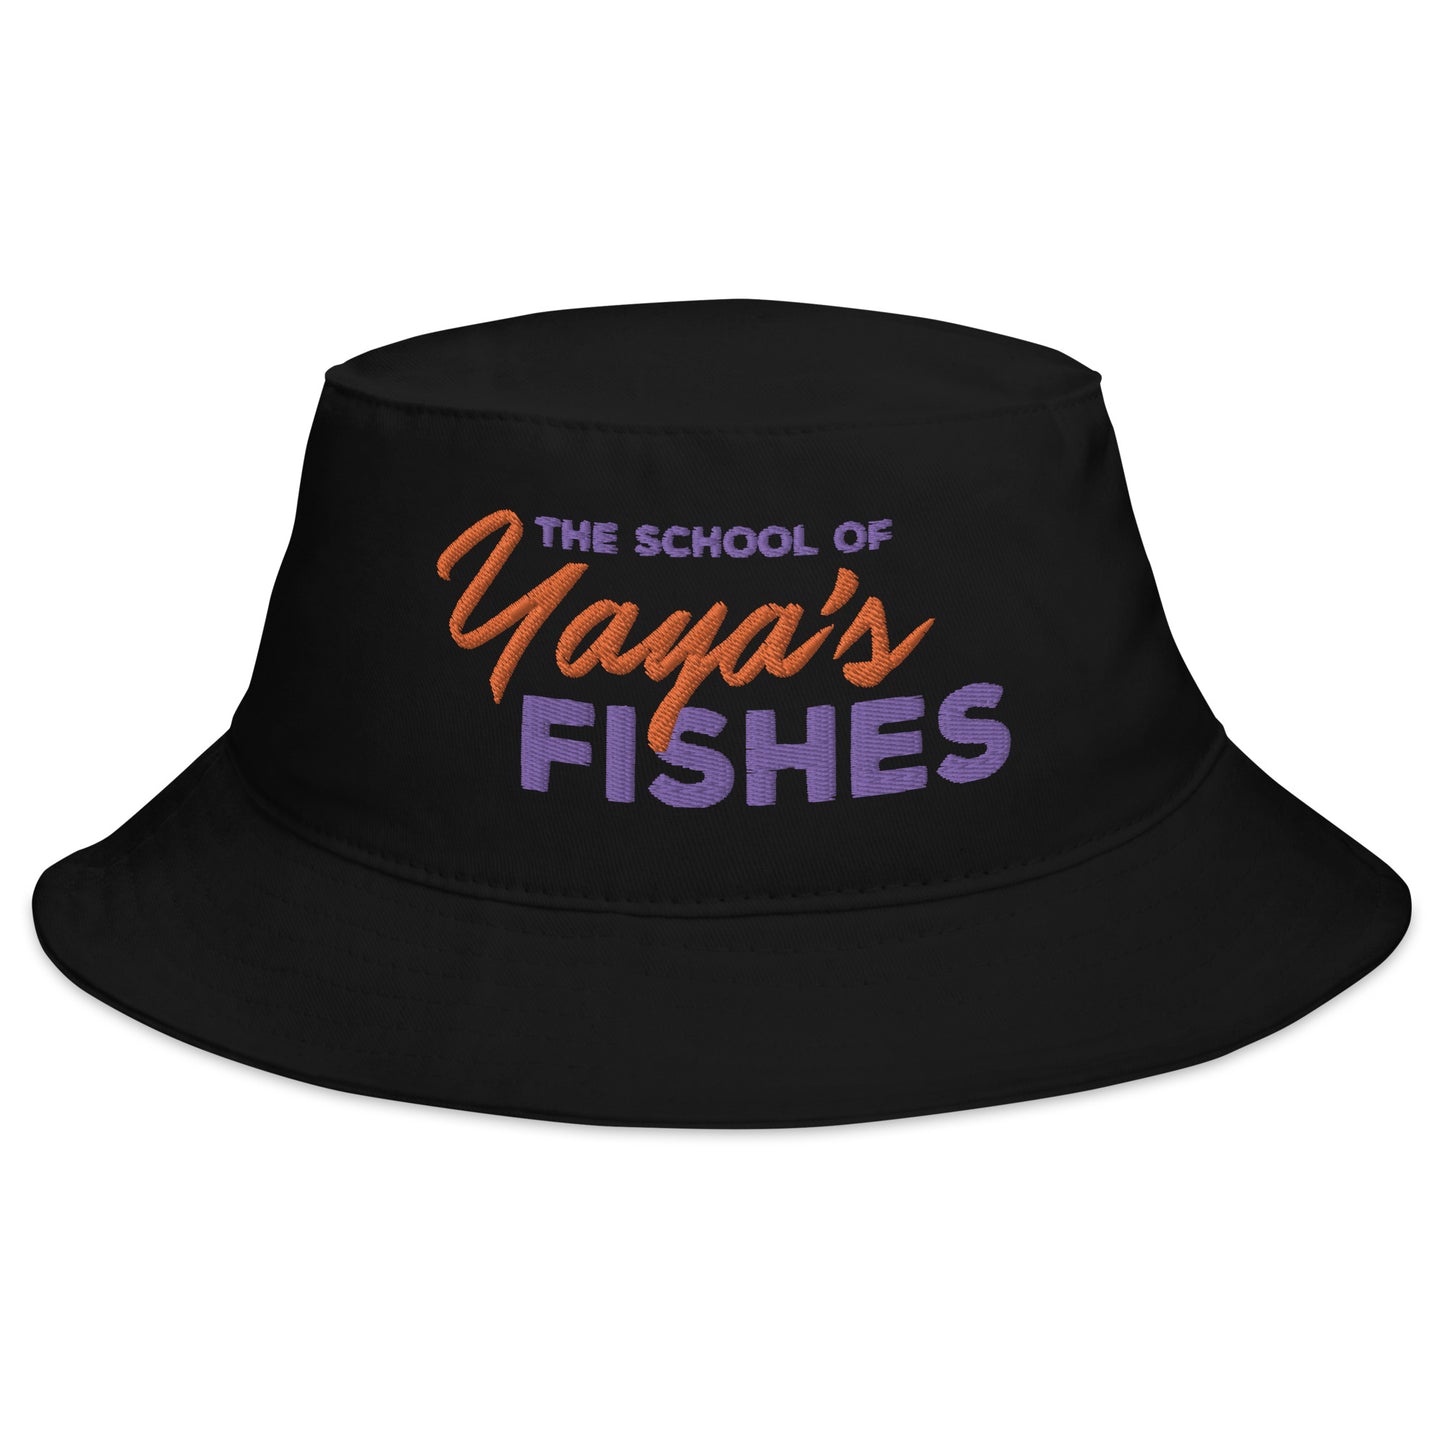 Description: Classic Bucket Hat in Black and purple and orange logo of the School of Yaya’s Fishes 